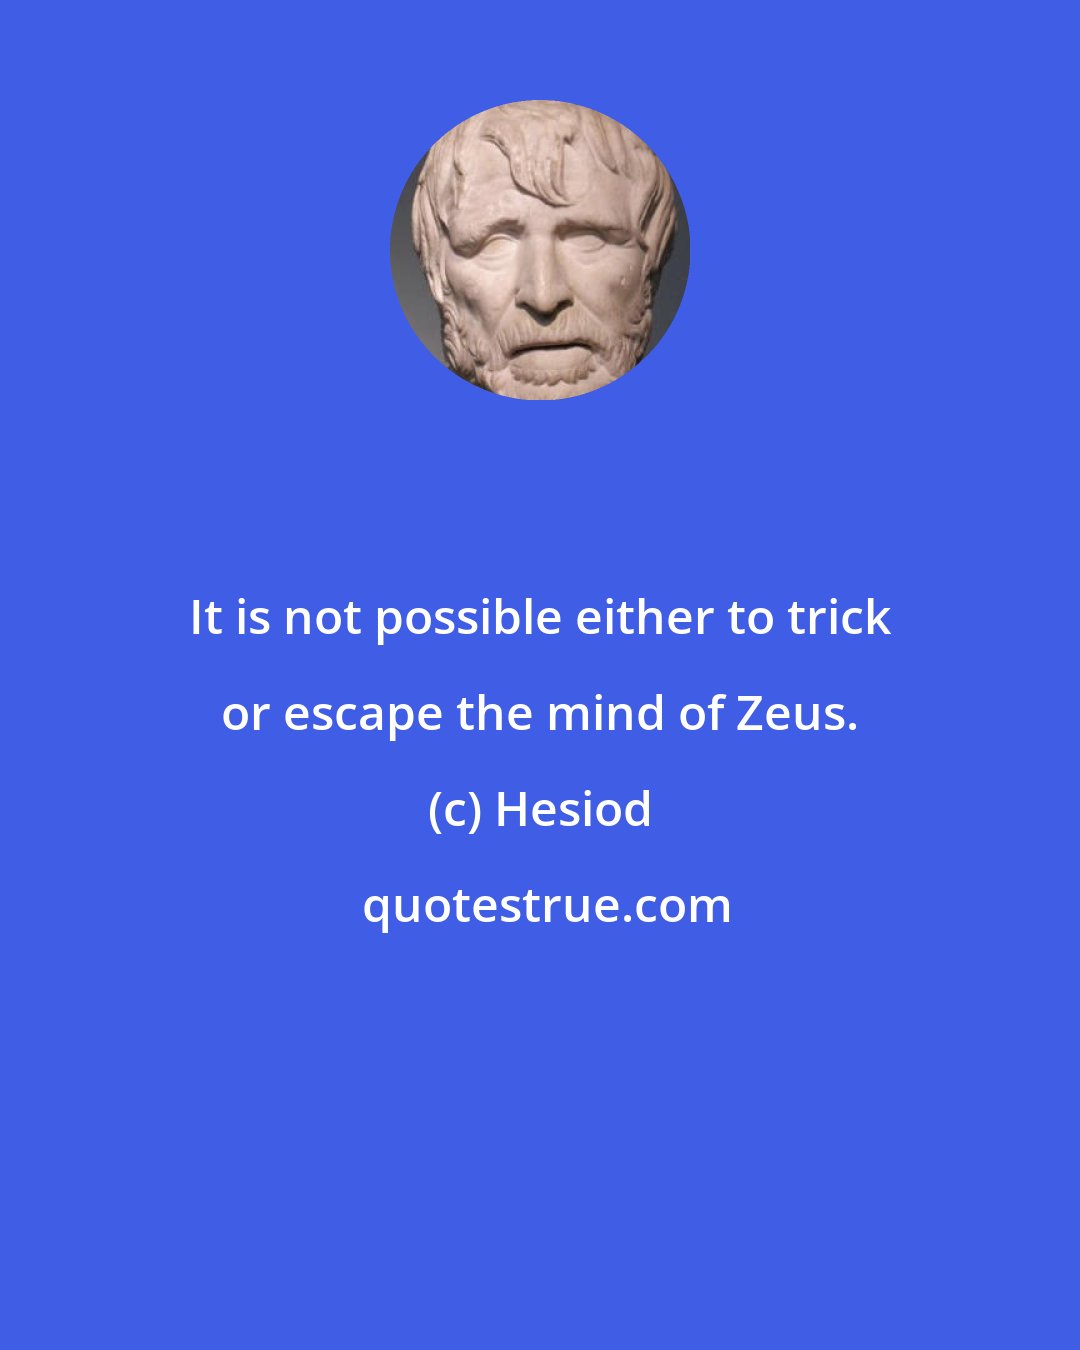 Hesiod: It is not possible either to trick or escape the mind of Zeus.